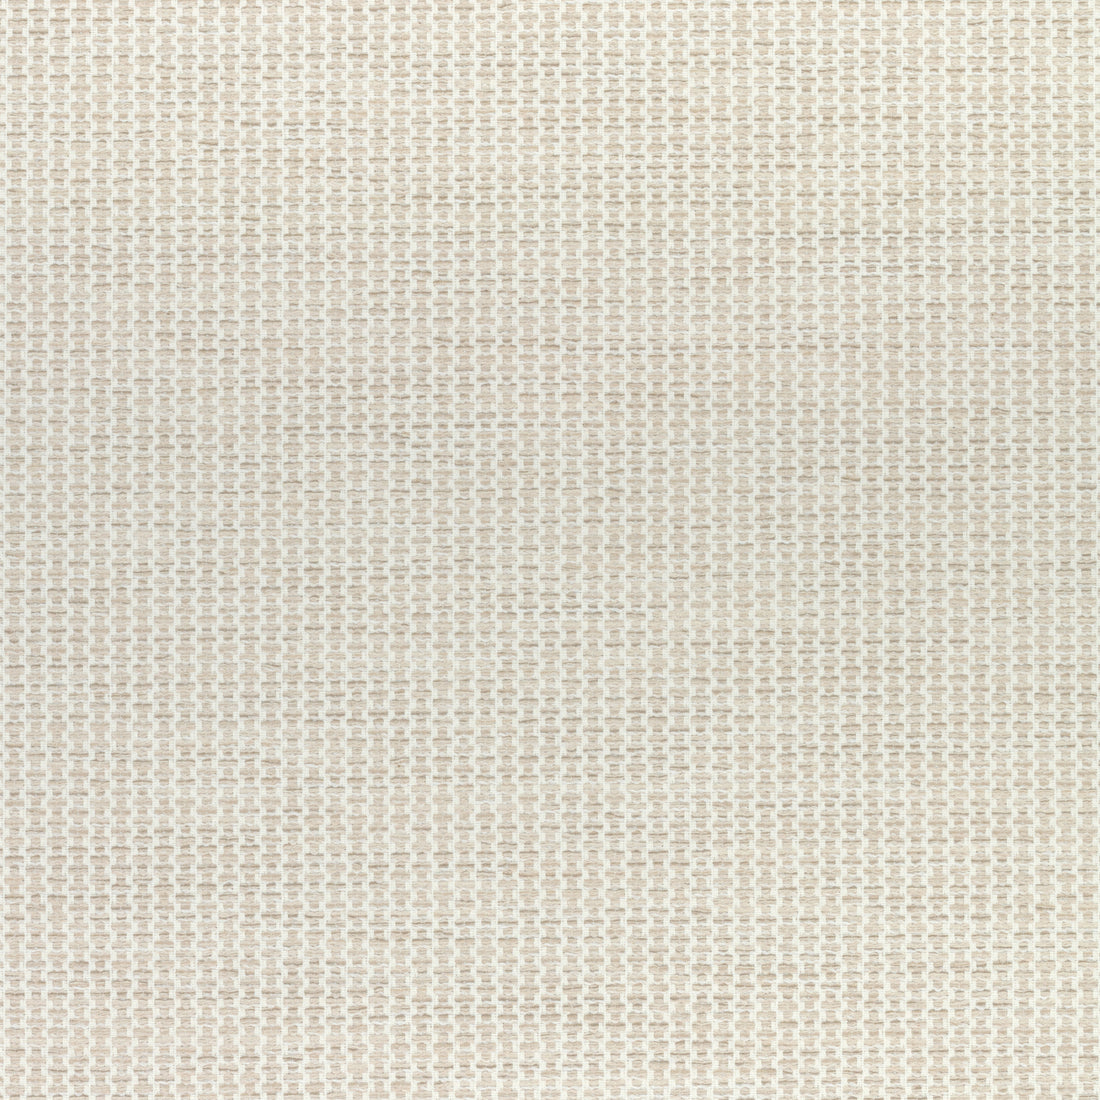 Ryder fabric in flax color - pattern number W74083 - by Thibaut in the Cadence collection